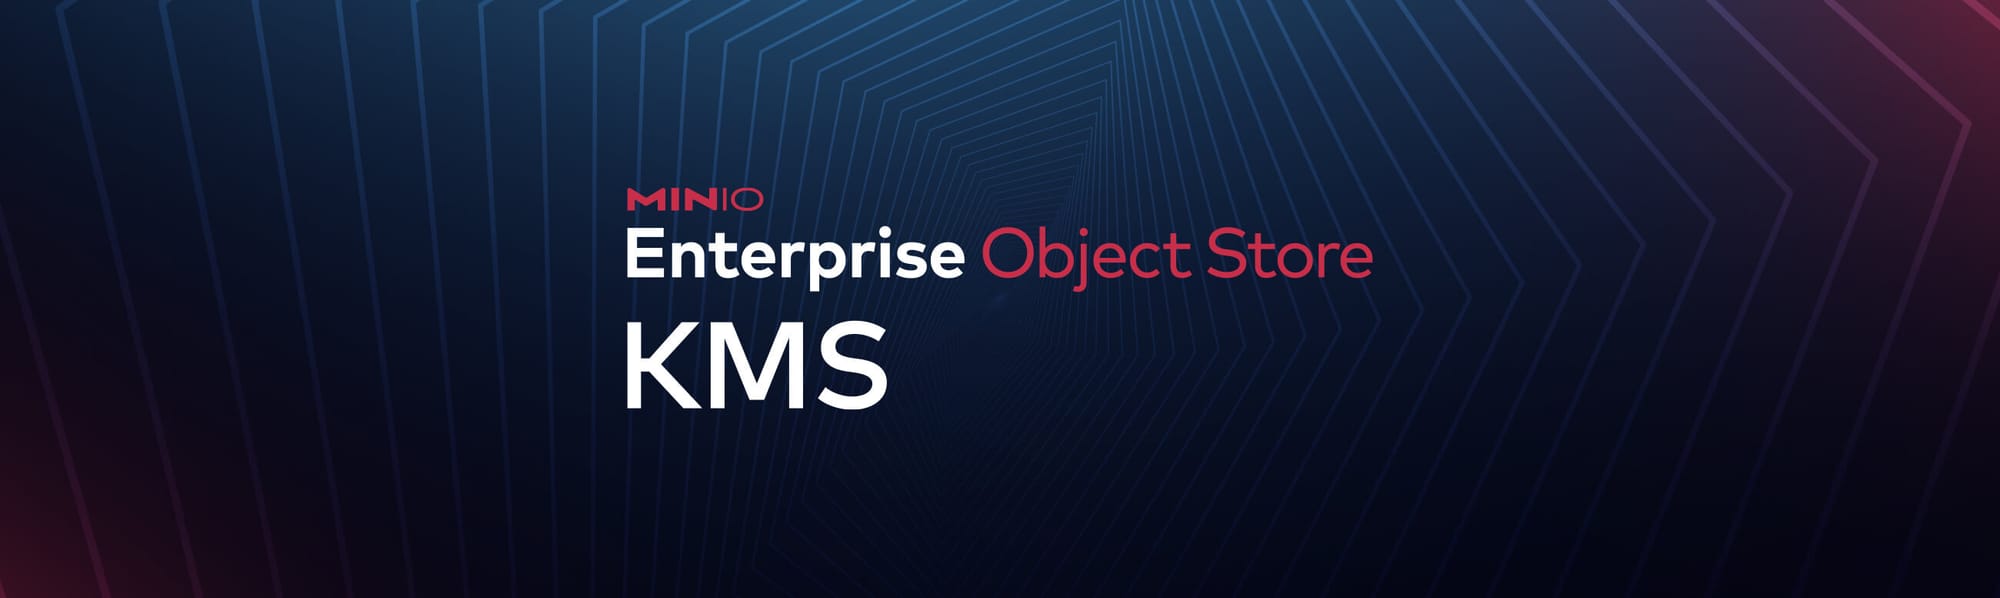 Solving Scale in Security: the MinIO Enterprise Object Store Key Management Server